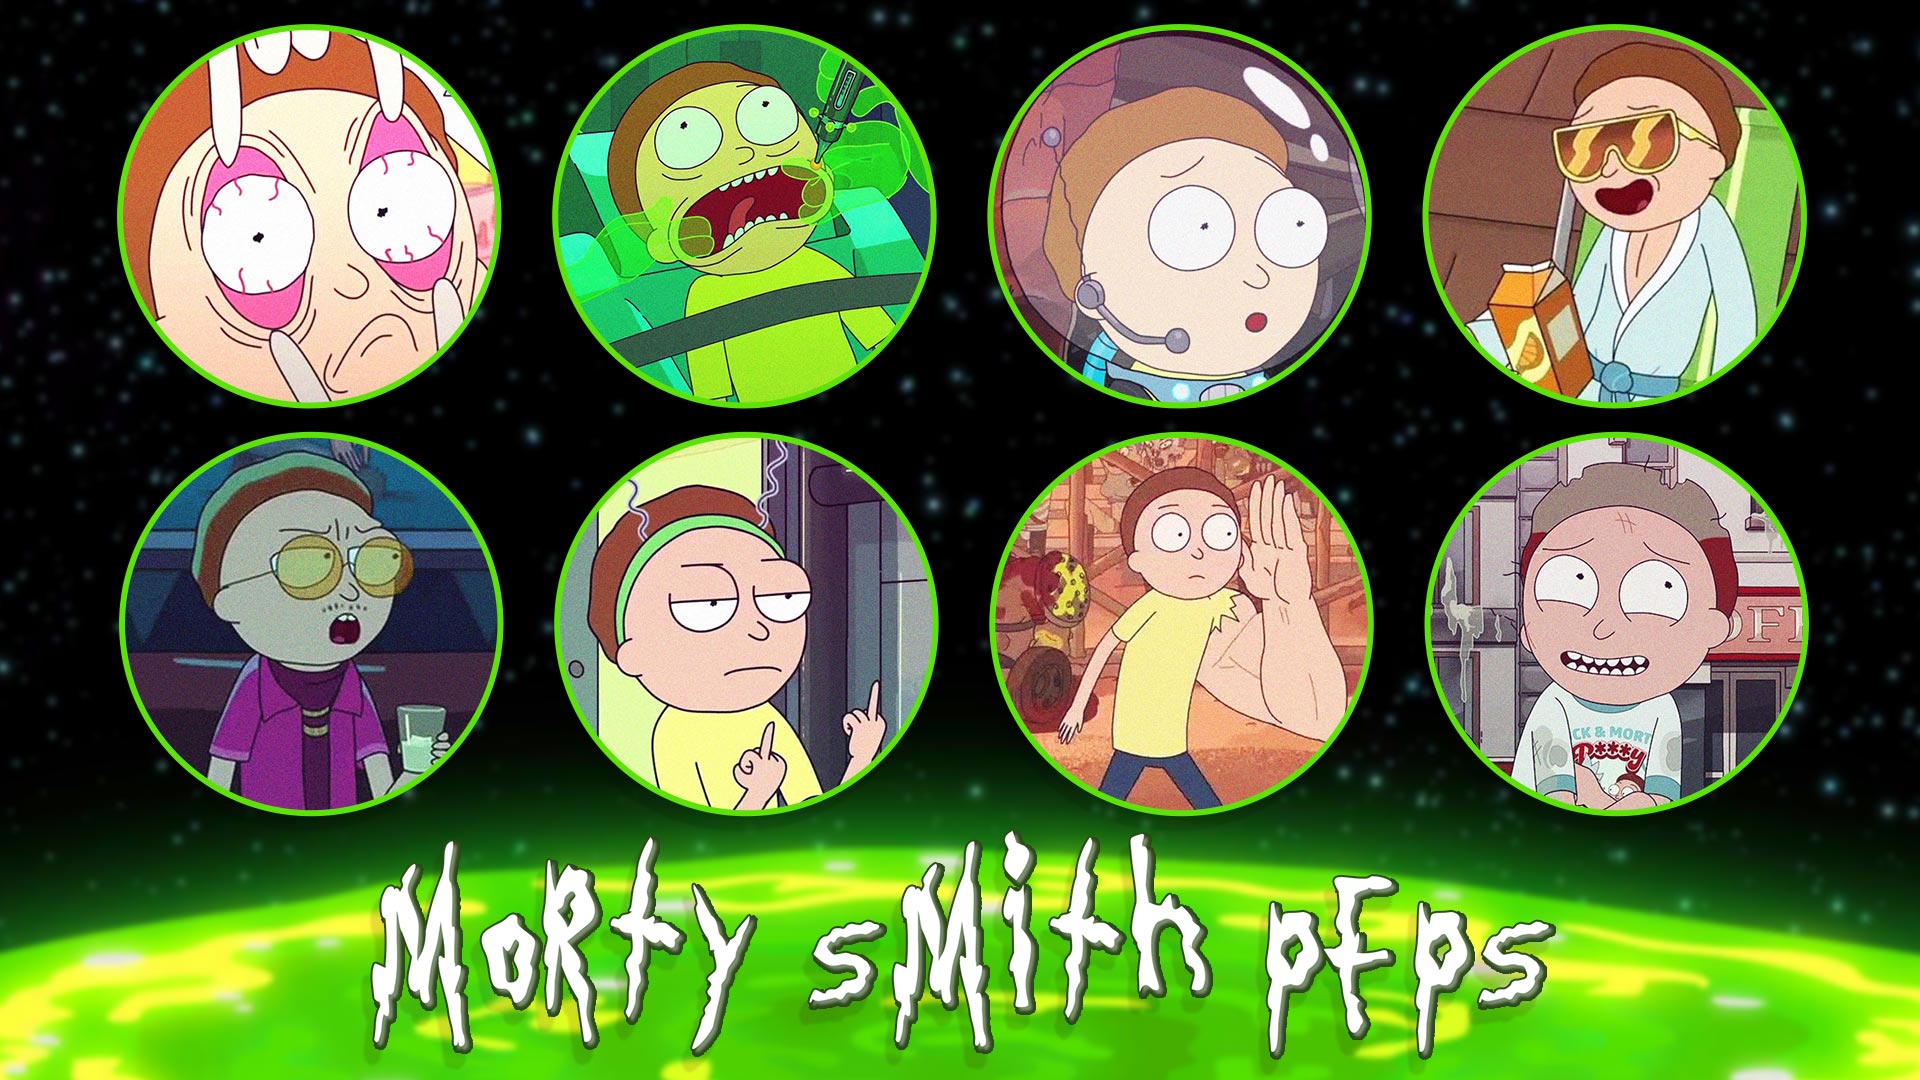 morty smith pfps